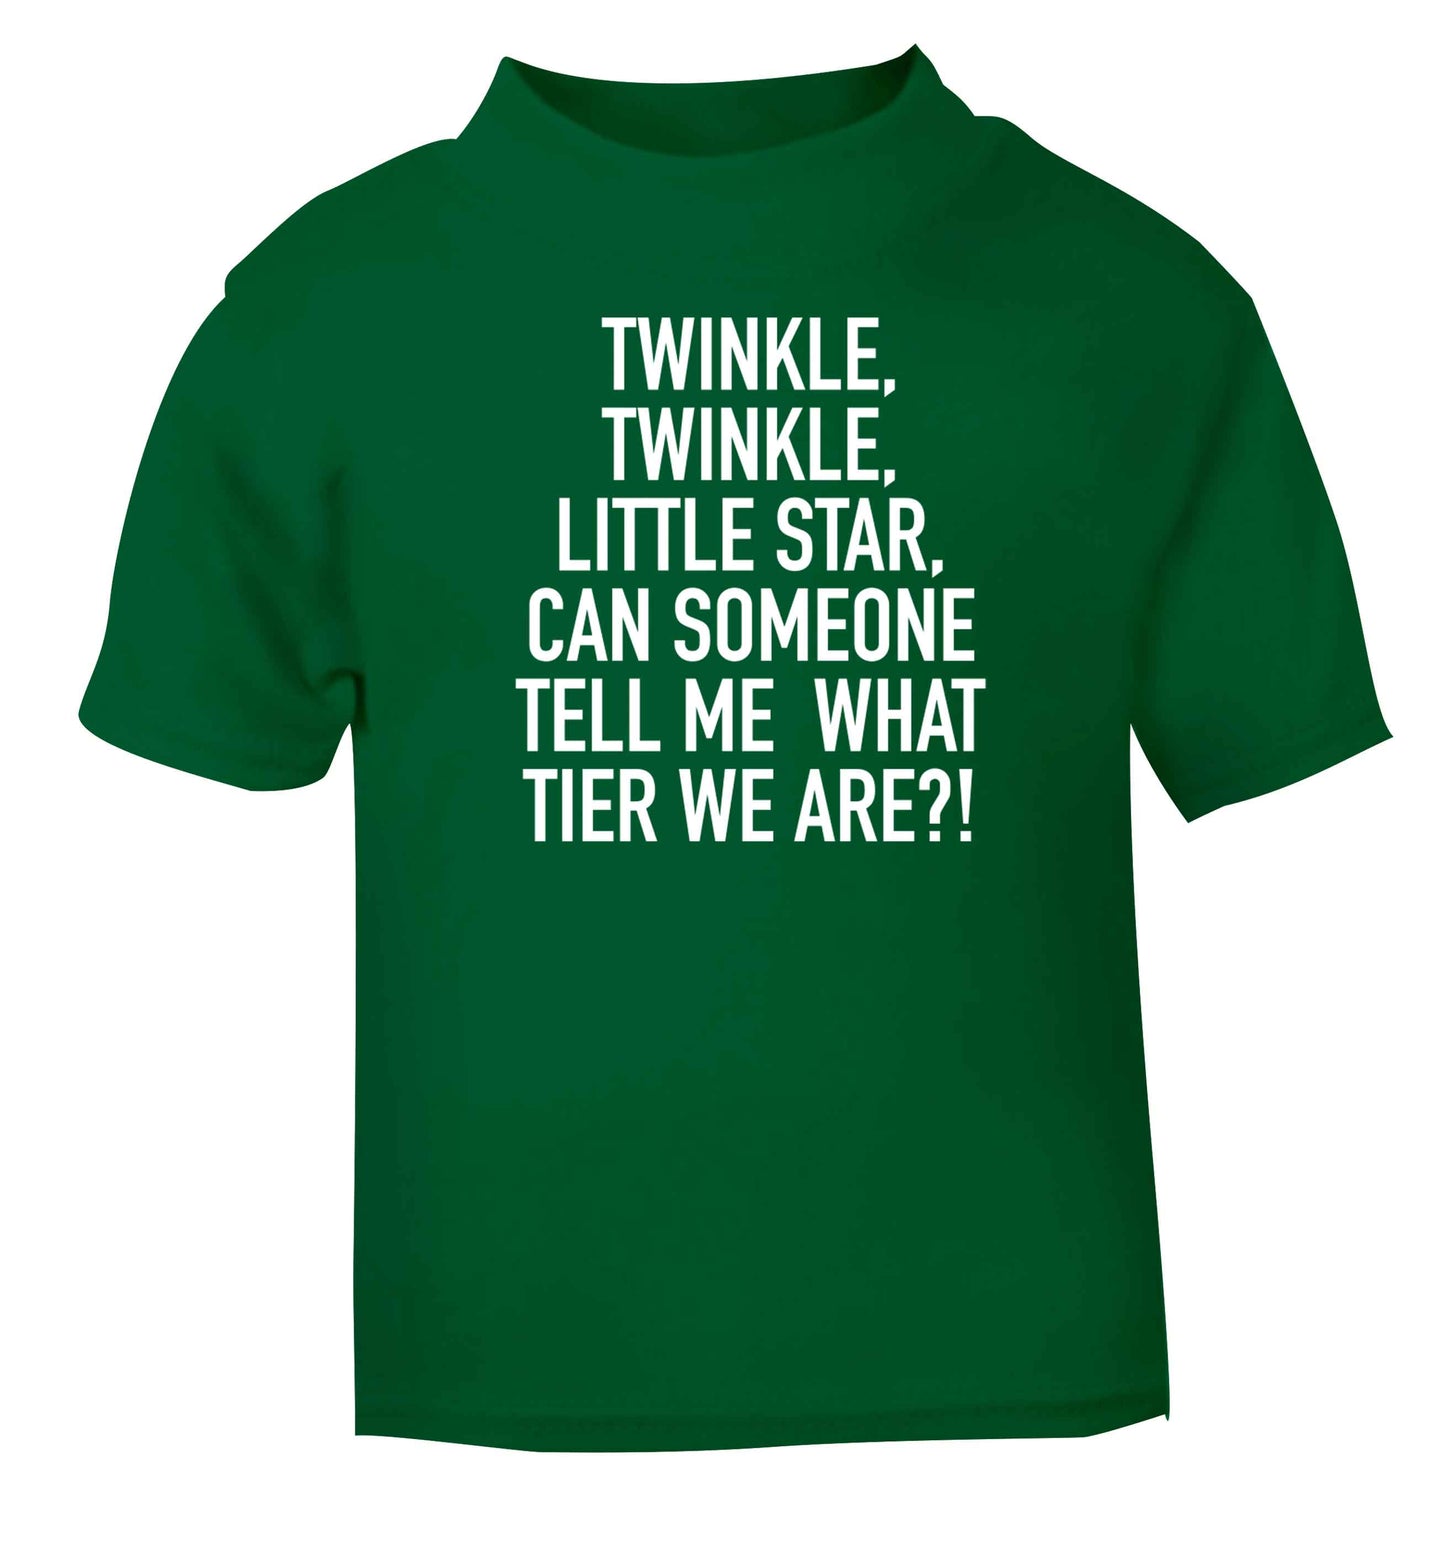 Twinkle twinkle, little star does anyone know what tier we are? green baby toddler Tshirt 2 Years